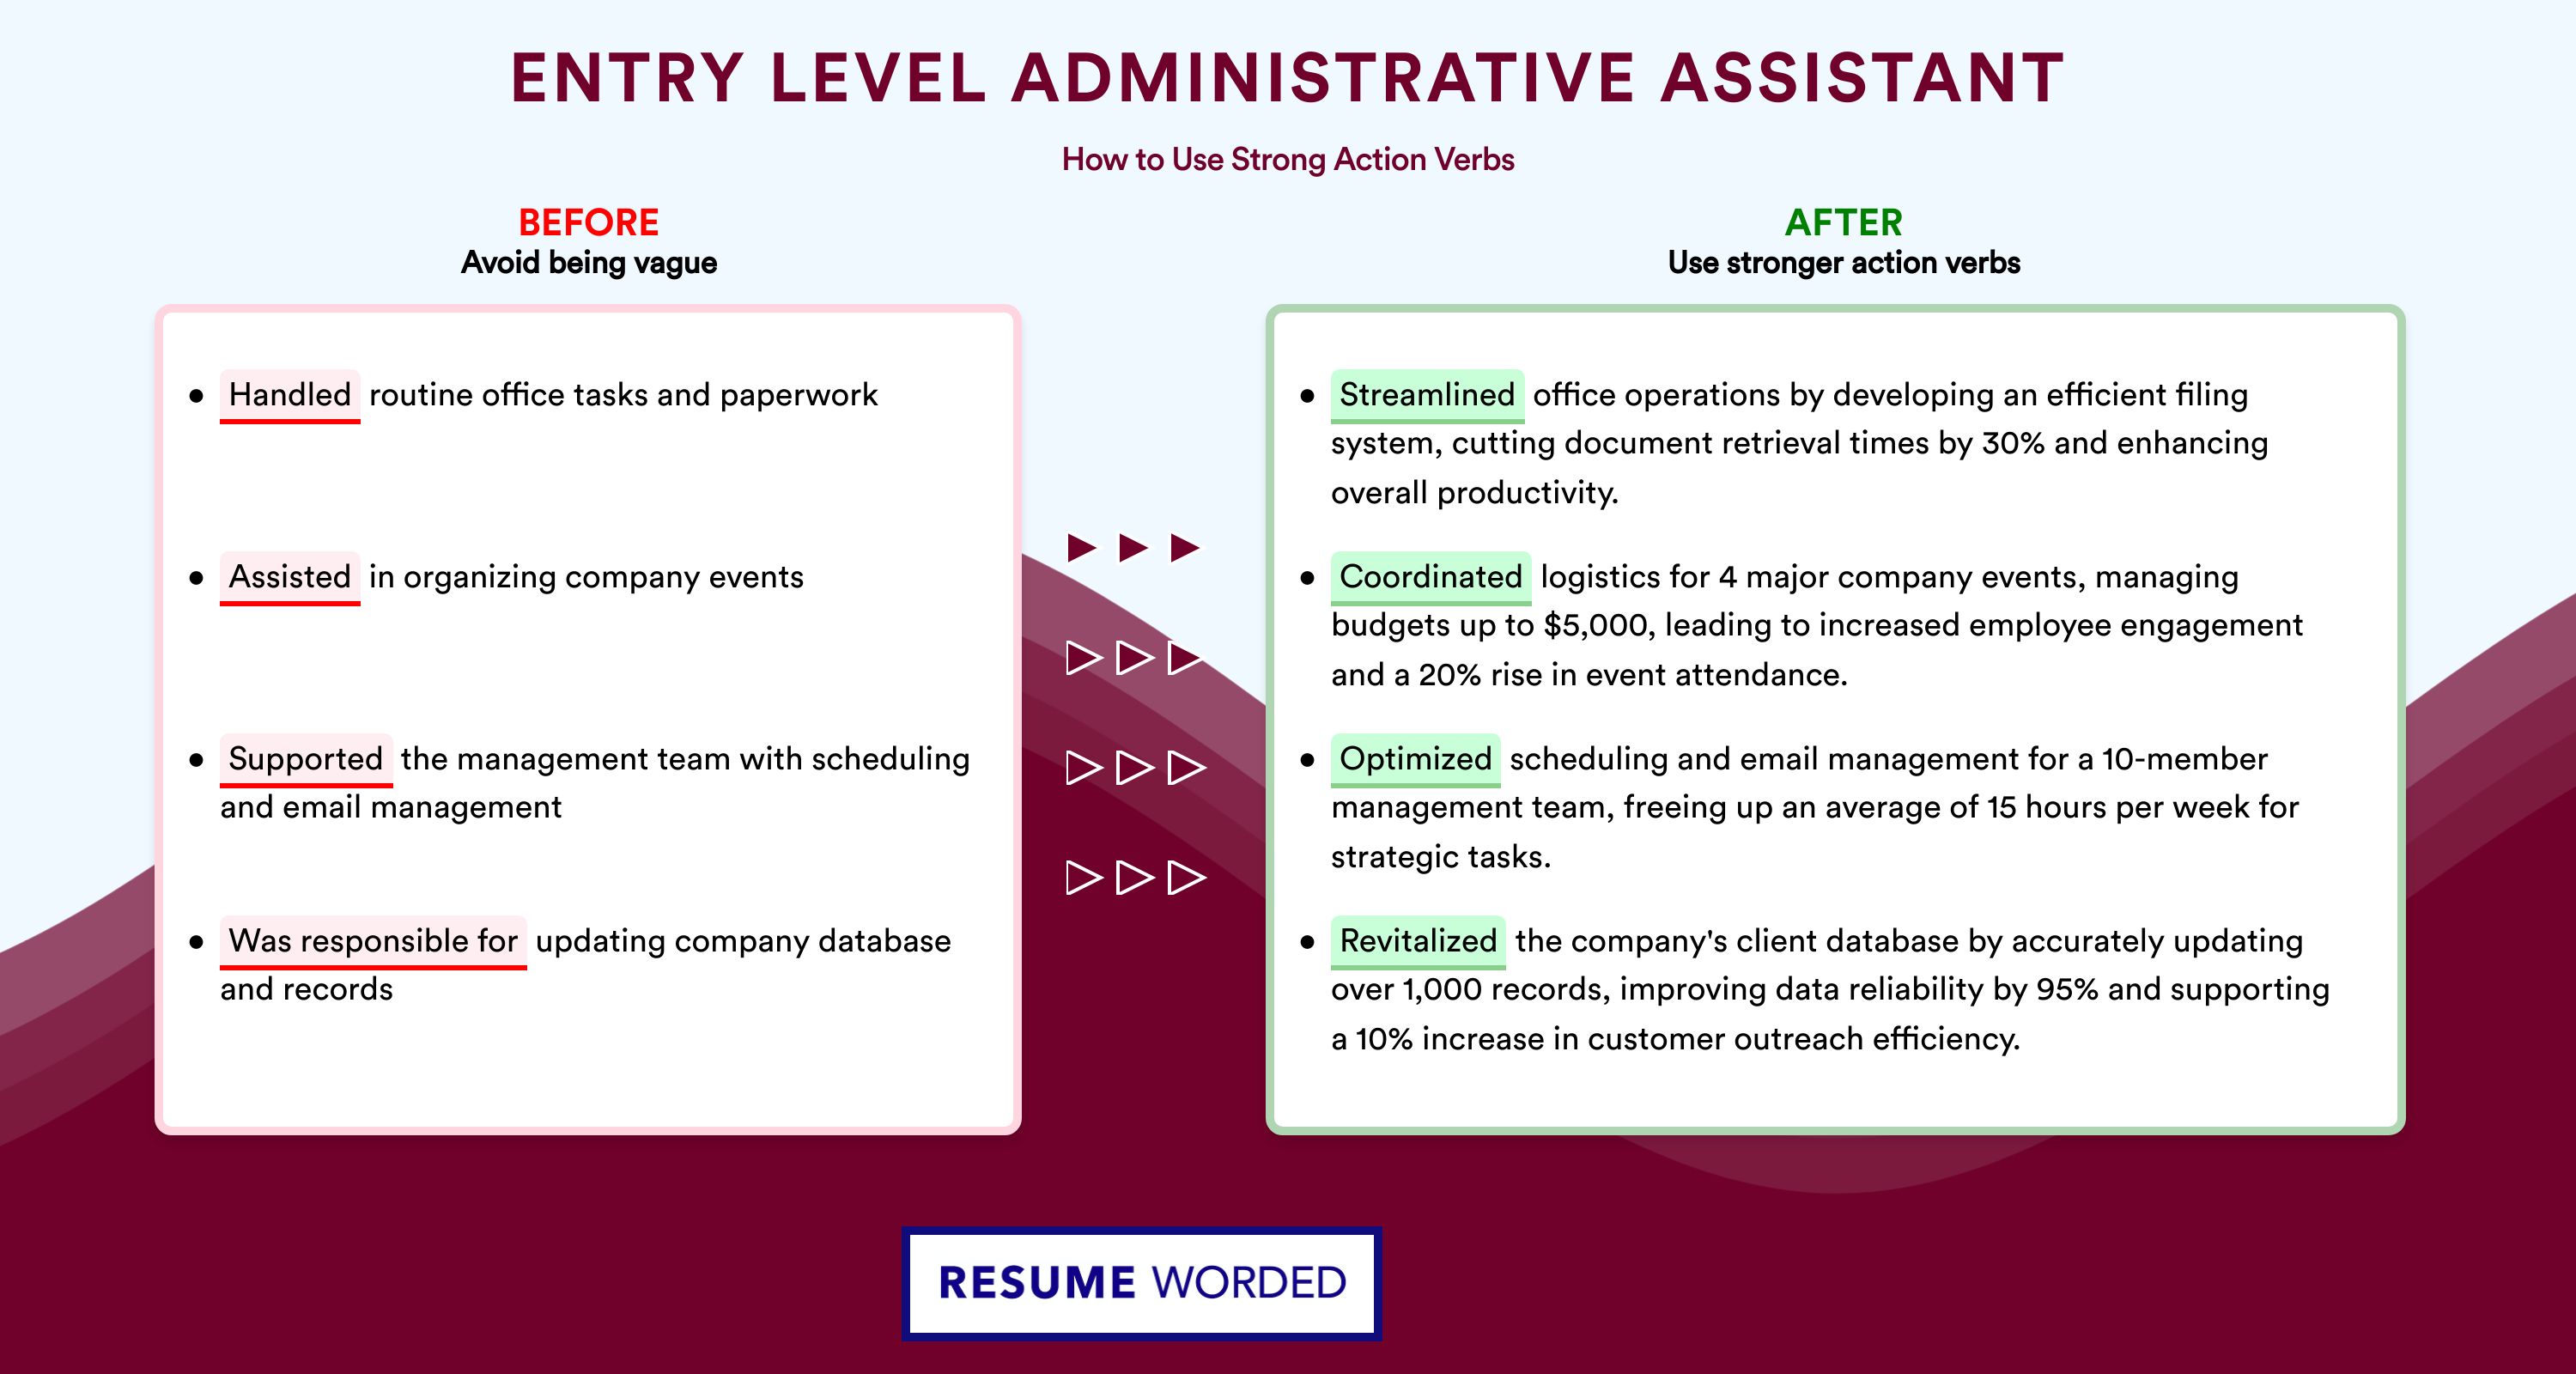 Action Verbs for Entry Level Administrative Assistant